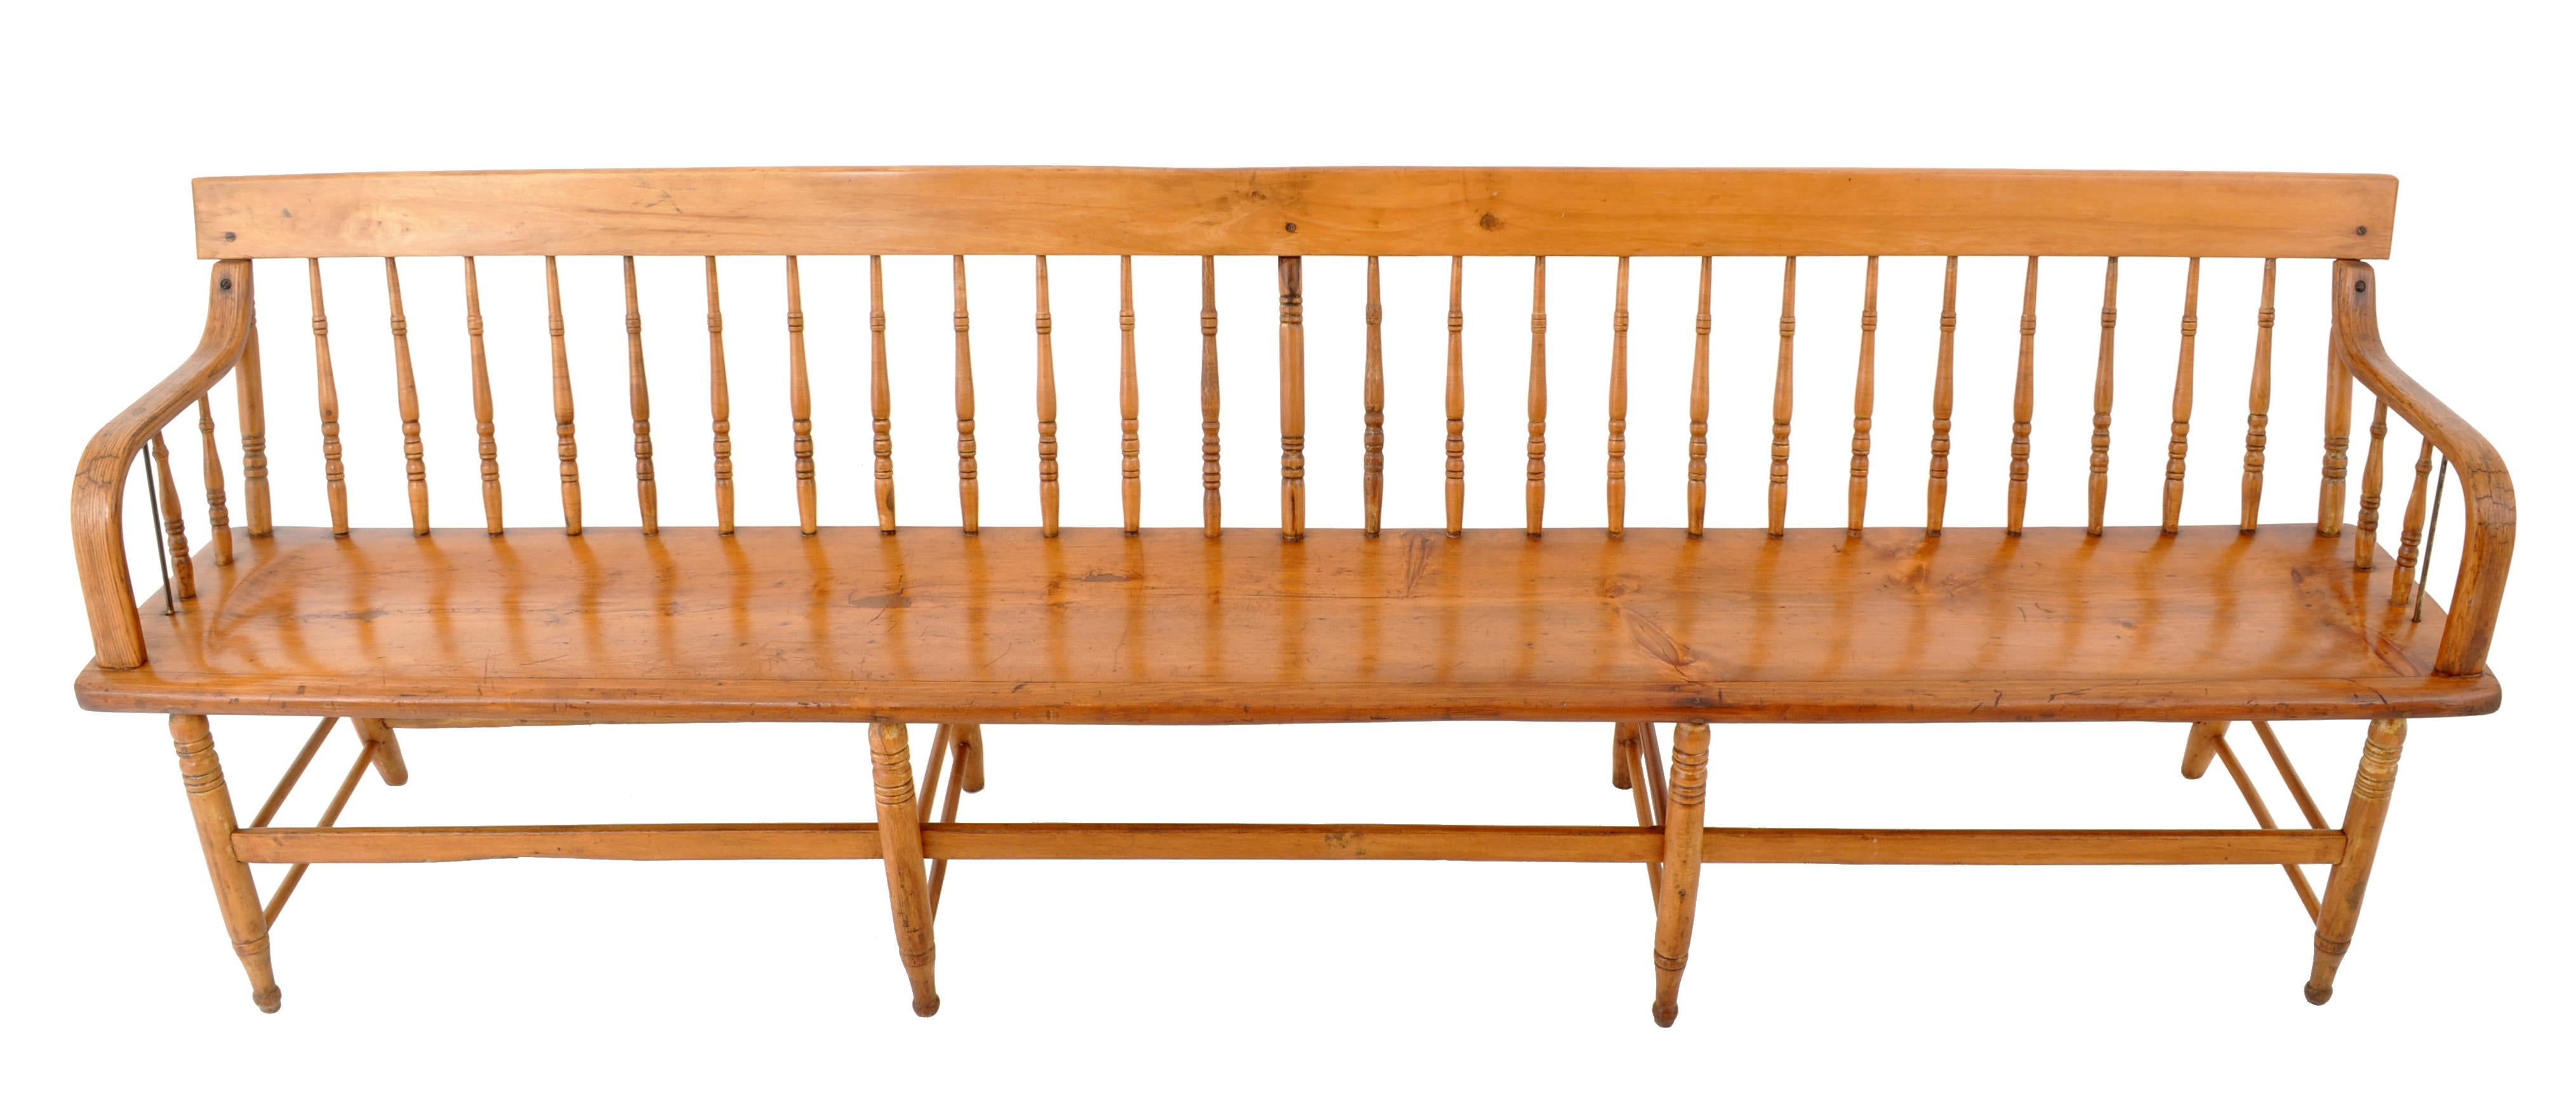 antique spindle bench